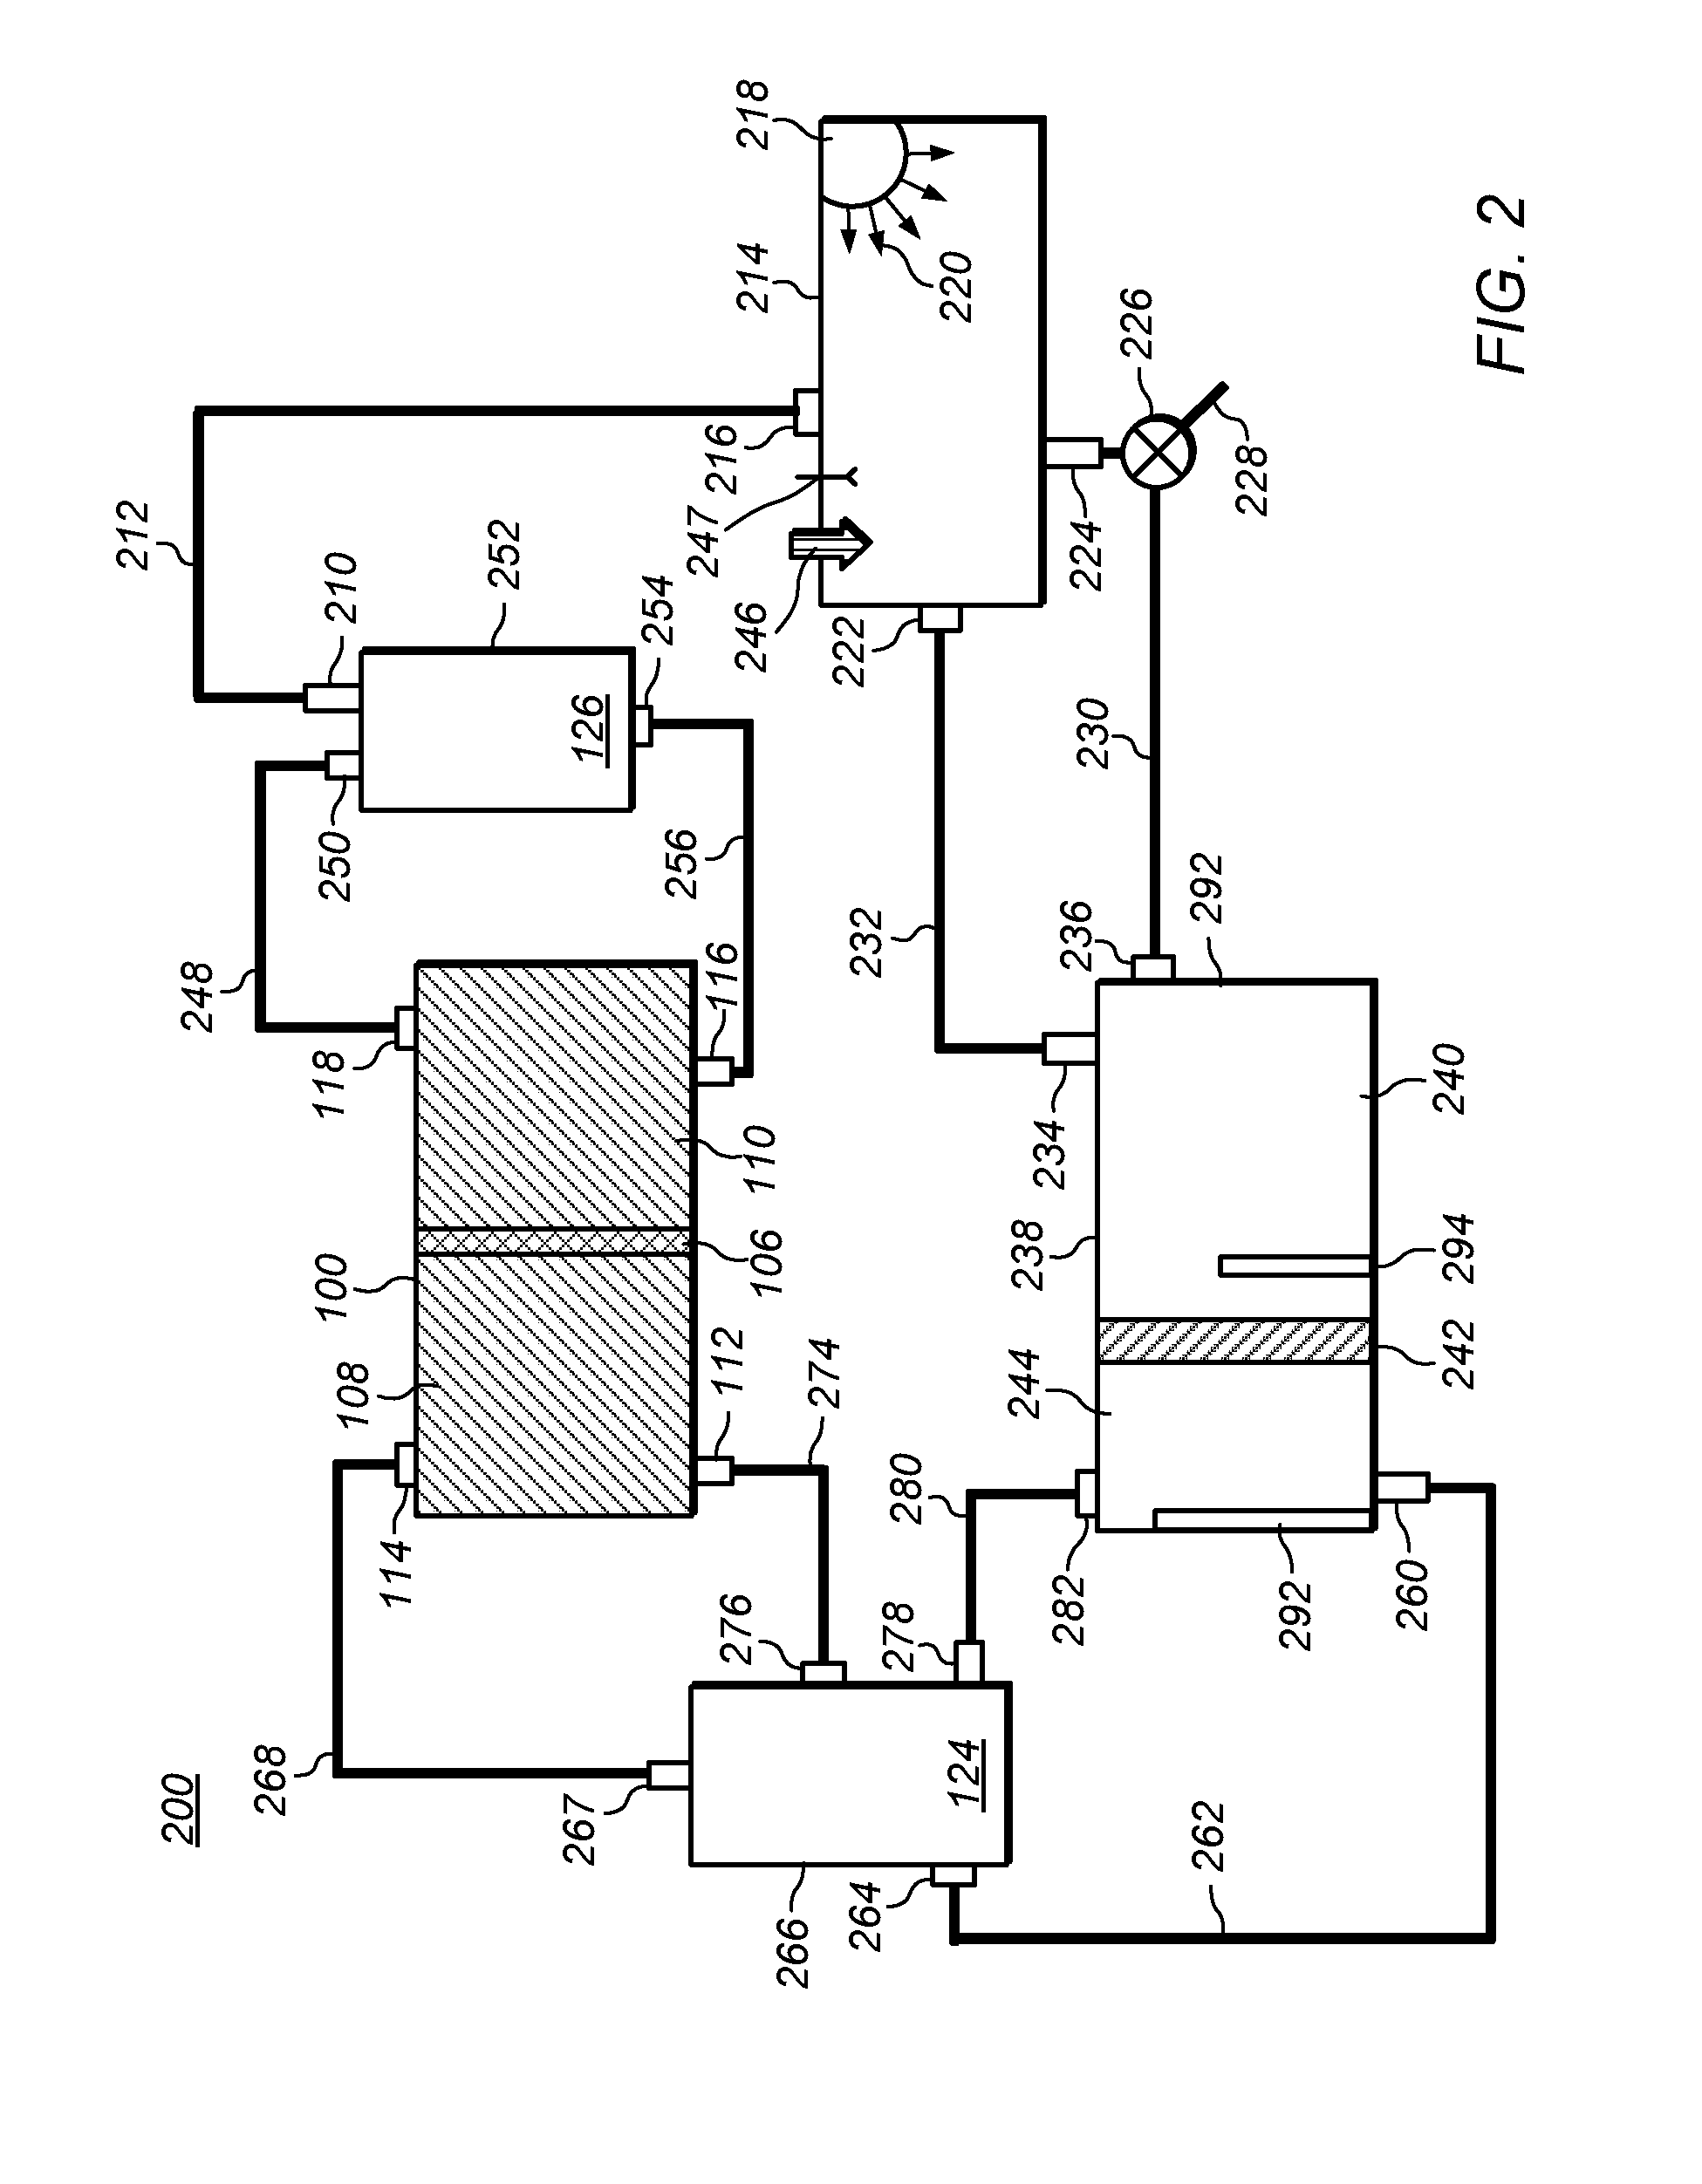 Methods of producing hydrochloric acid from hydrogen gas and chlorine gas